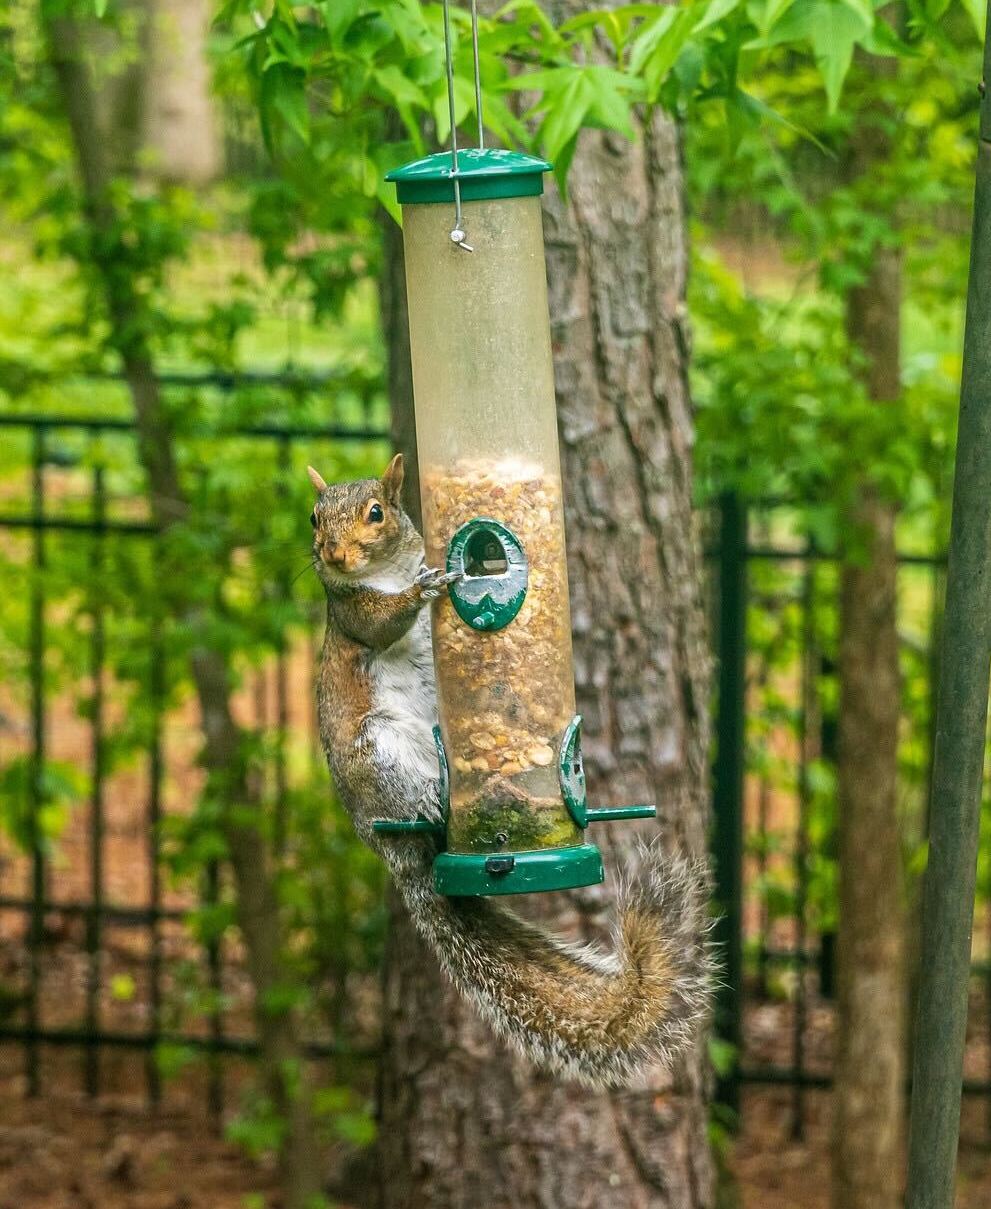 Pests can use bird feeders as a food source